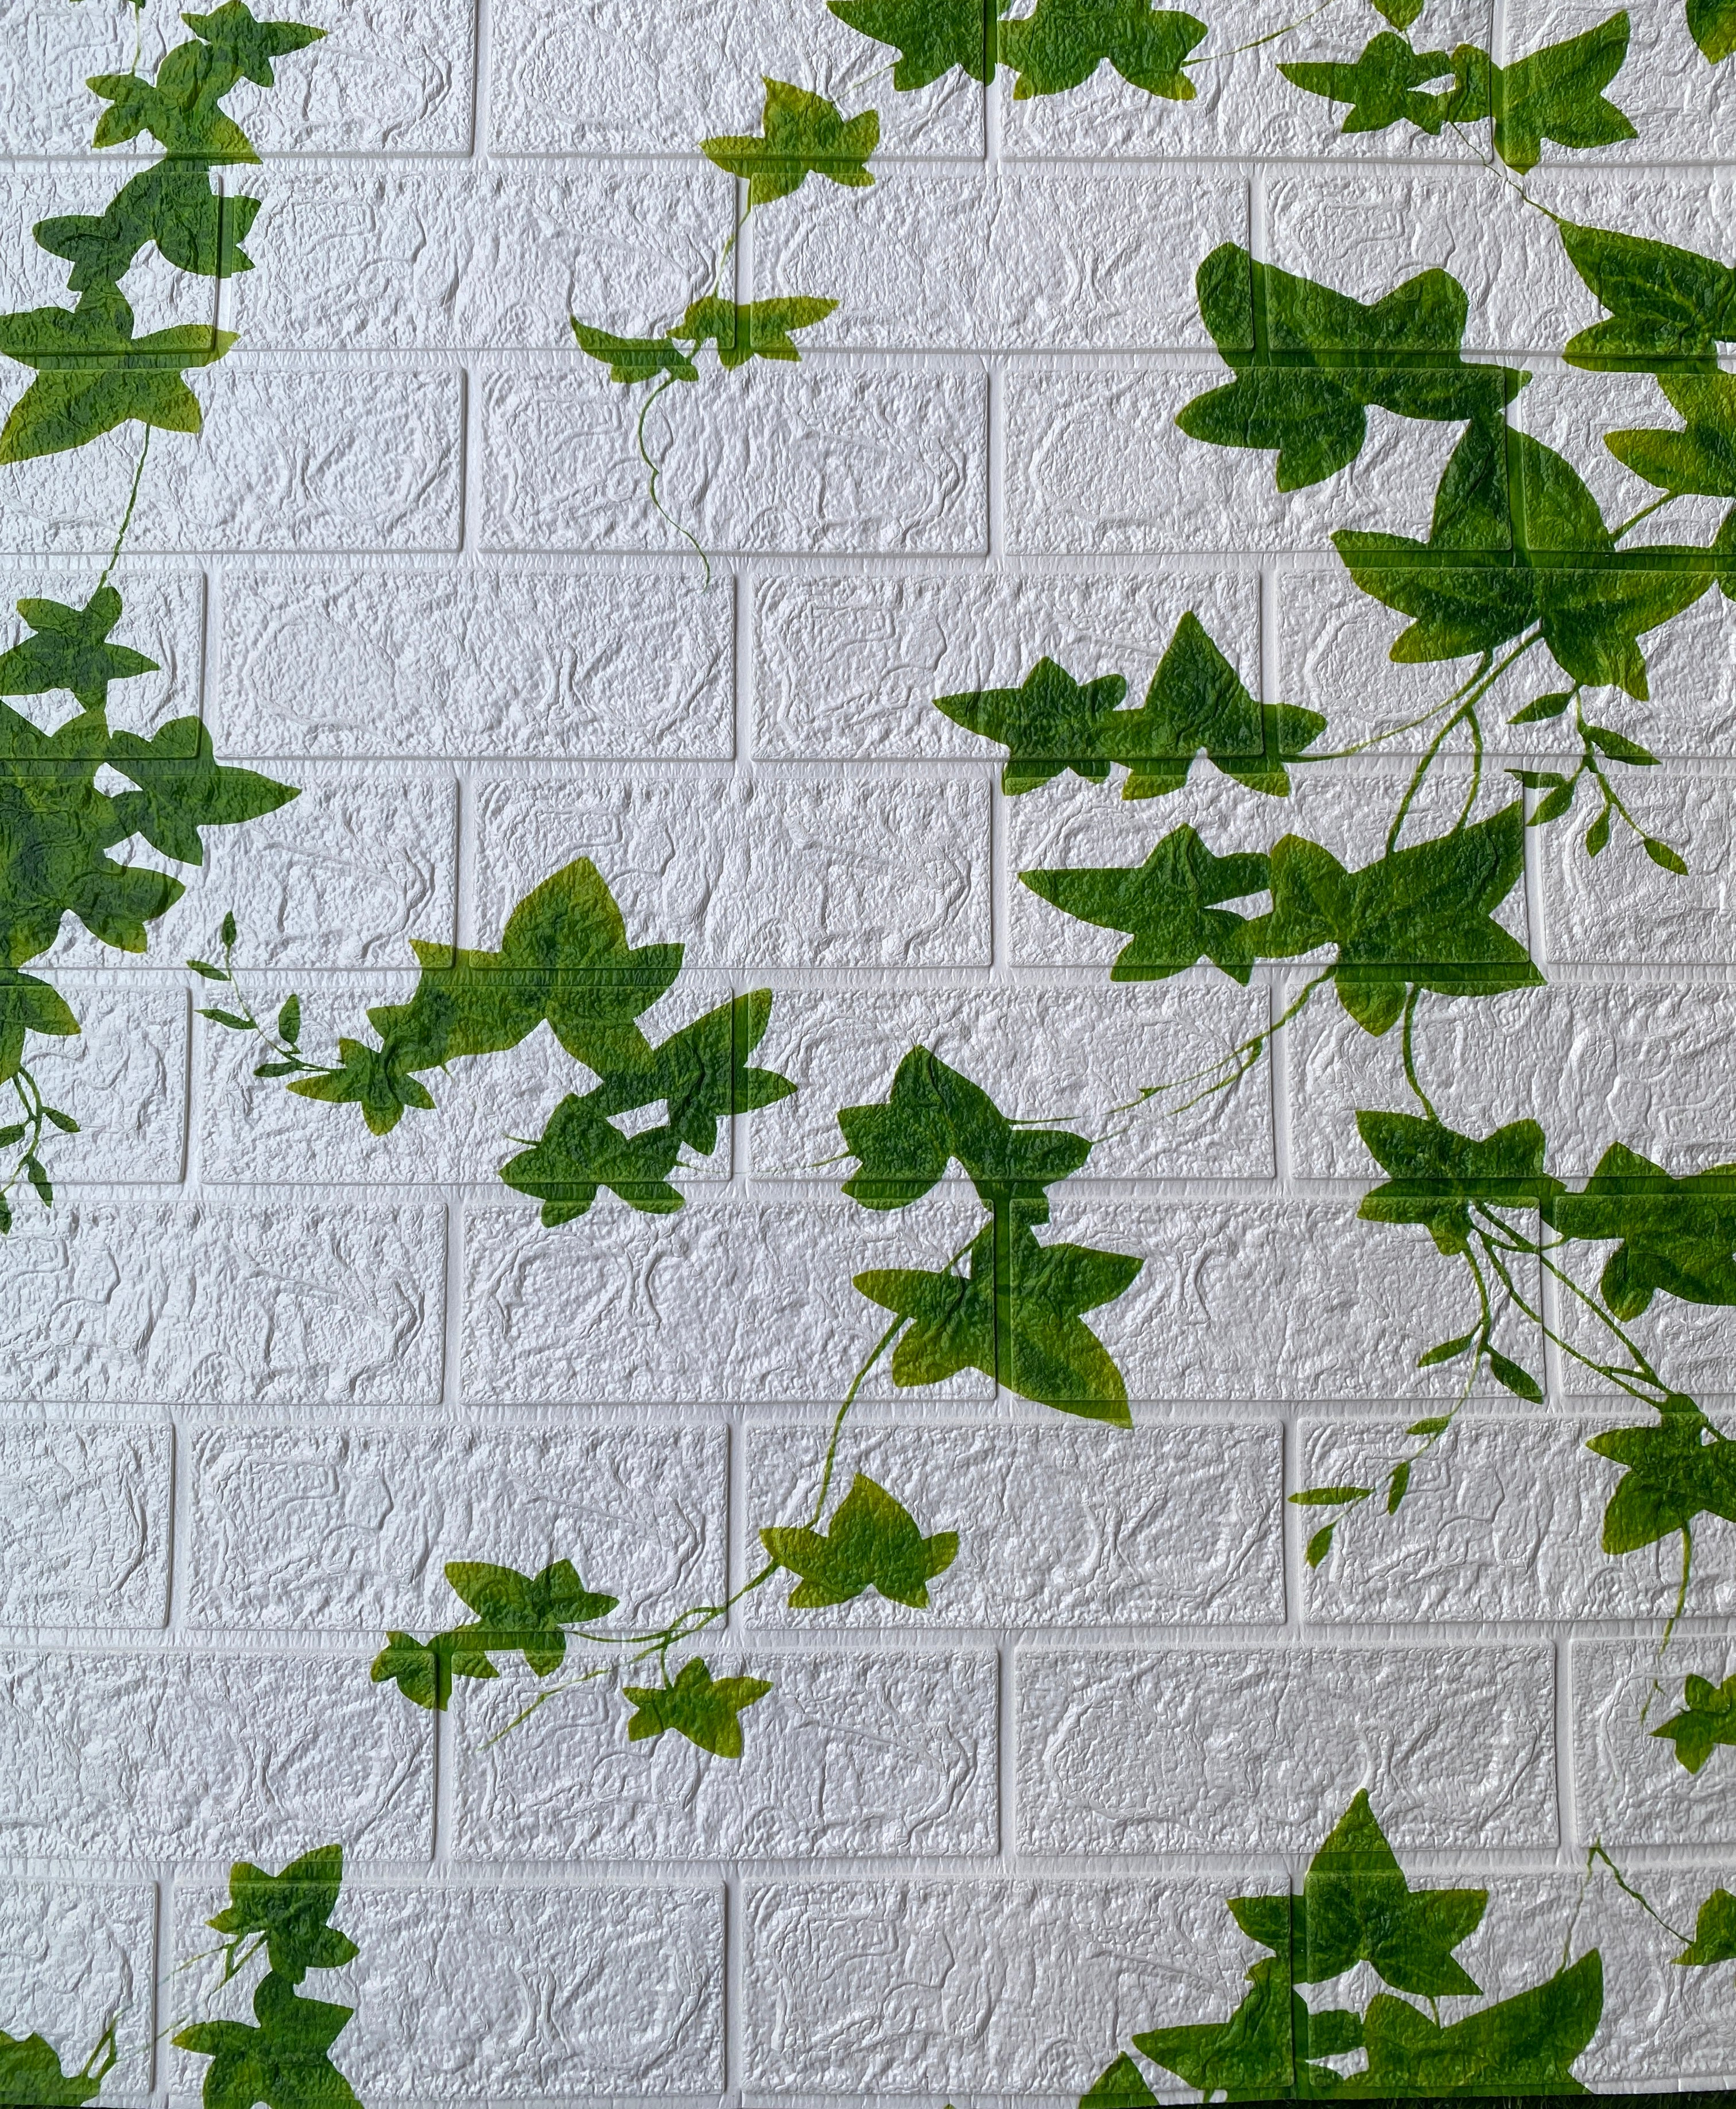 3D Nature White Brick with Leaves Wallpaper Self Adhesive, Peel and Stick Foam Sheet for Wall décor and Home décor (70 CM x 77 CM)(Set of 5)(FS-02)